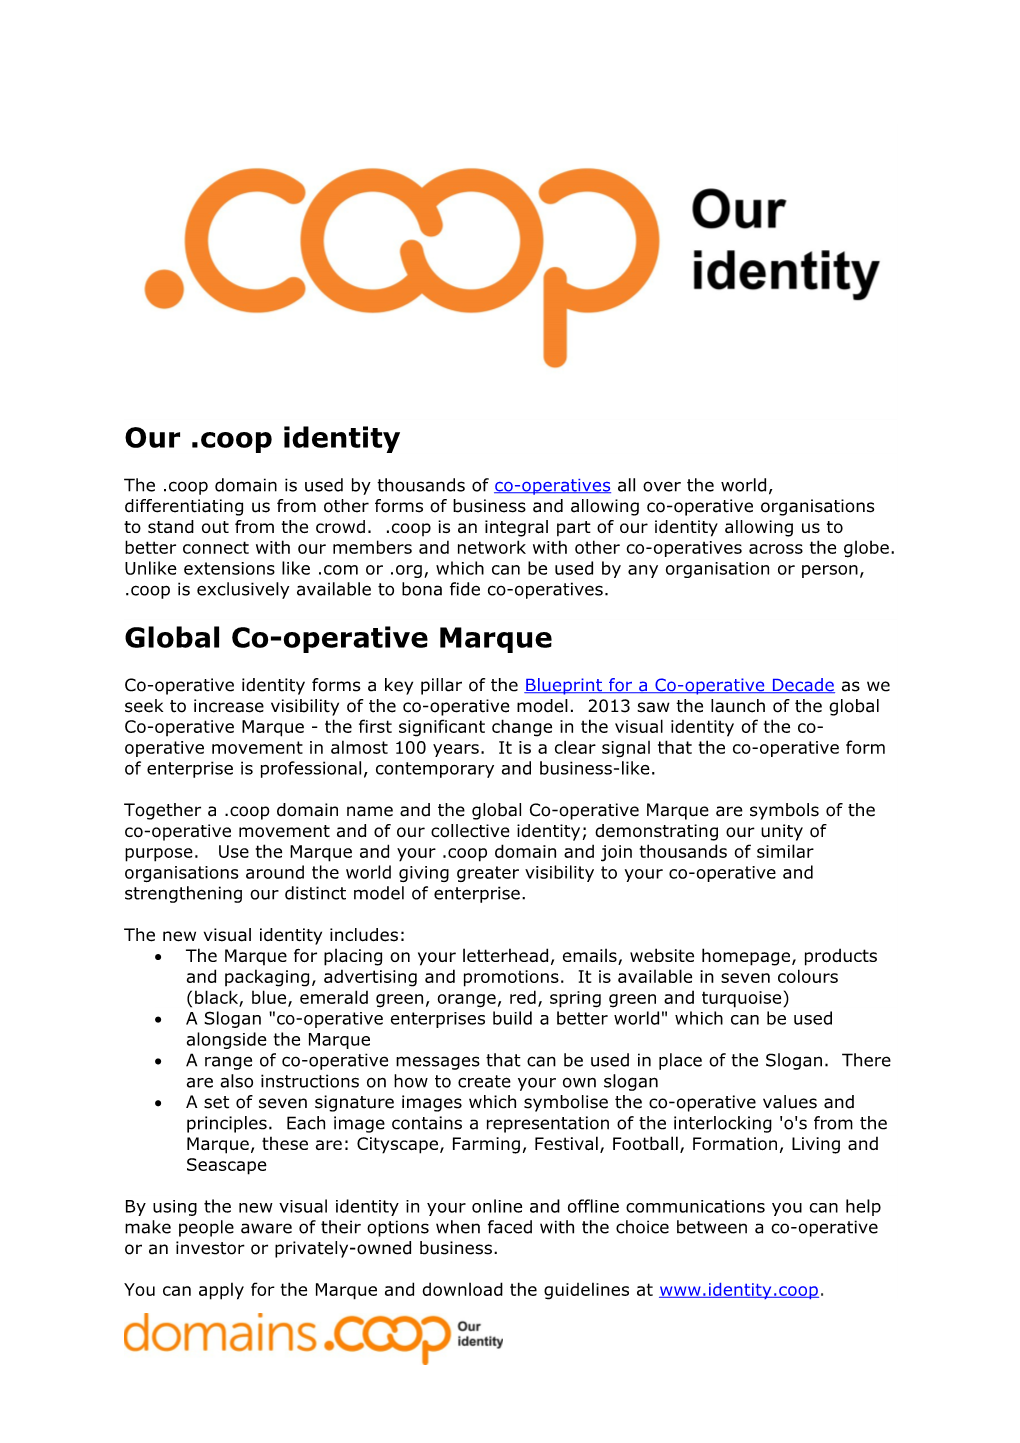 Our .Coop Identity